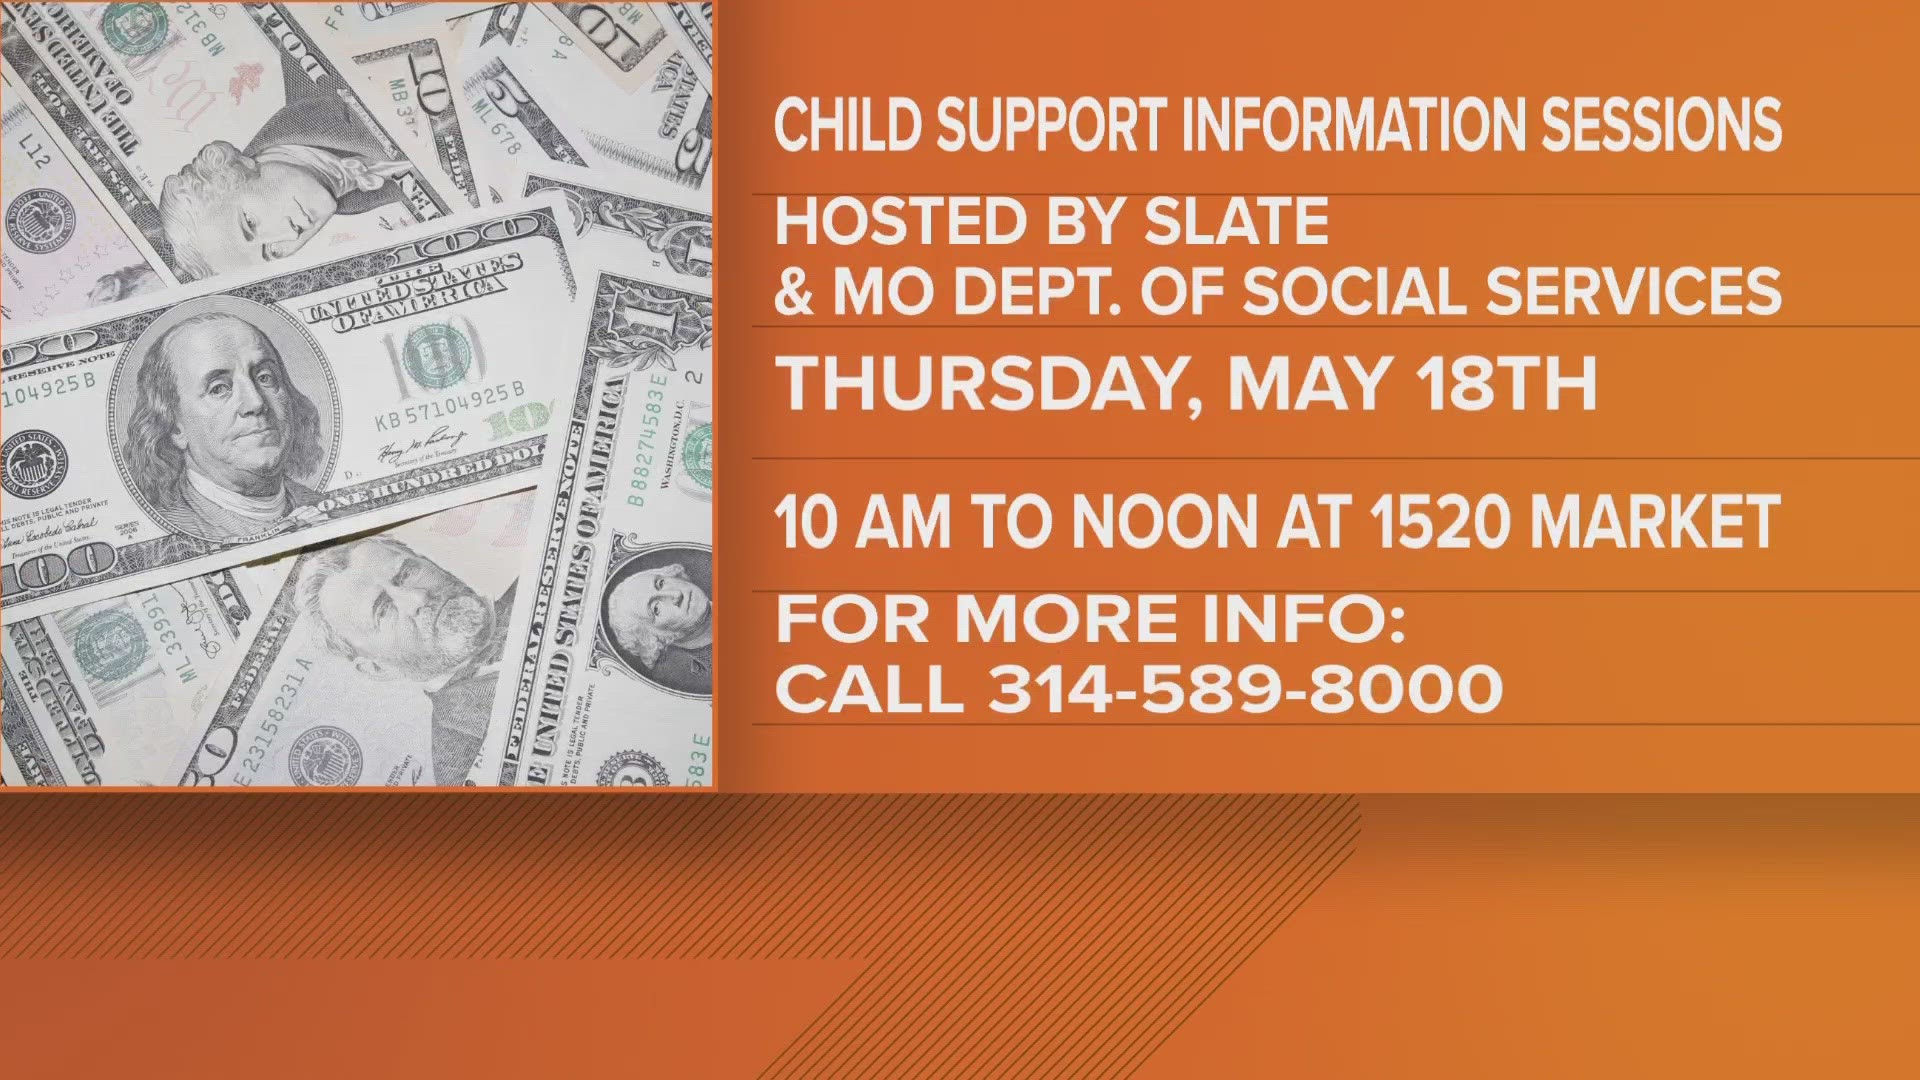 The St. Louis Agency on Training and Employment (SLATE) will answer all your questions at a session on Thursday, May 18, whether you pay or receive child support.